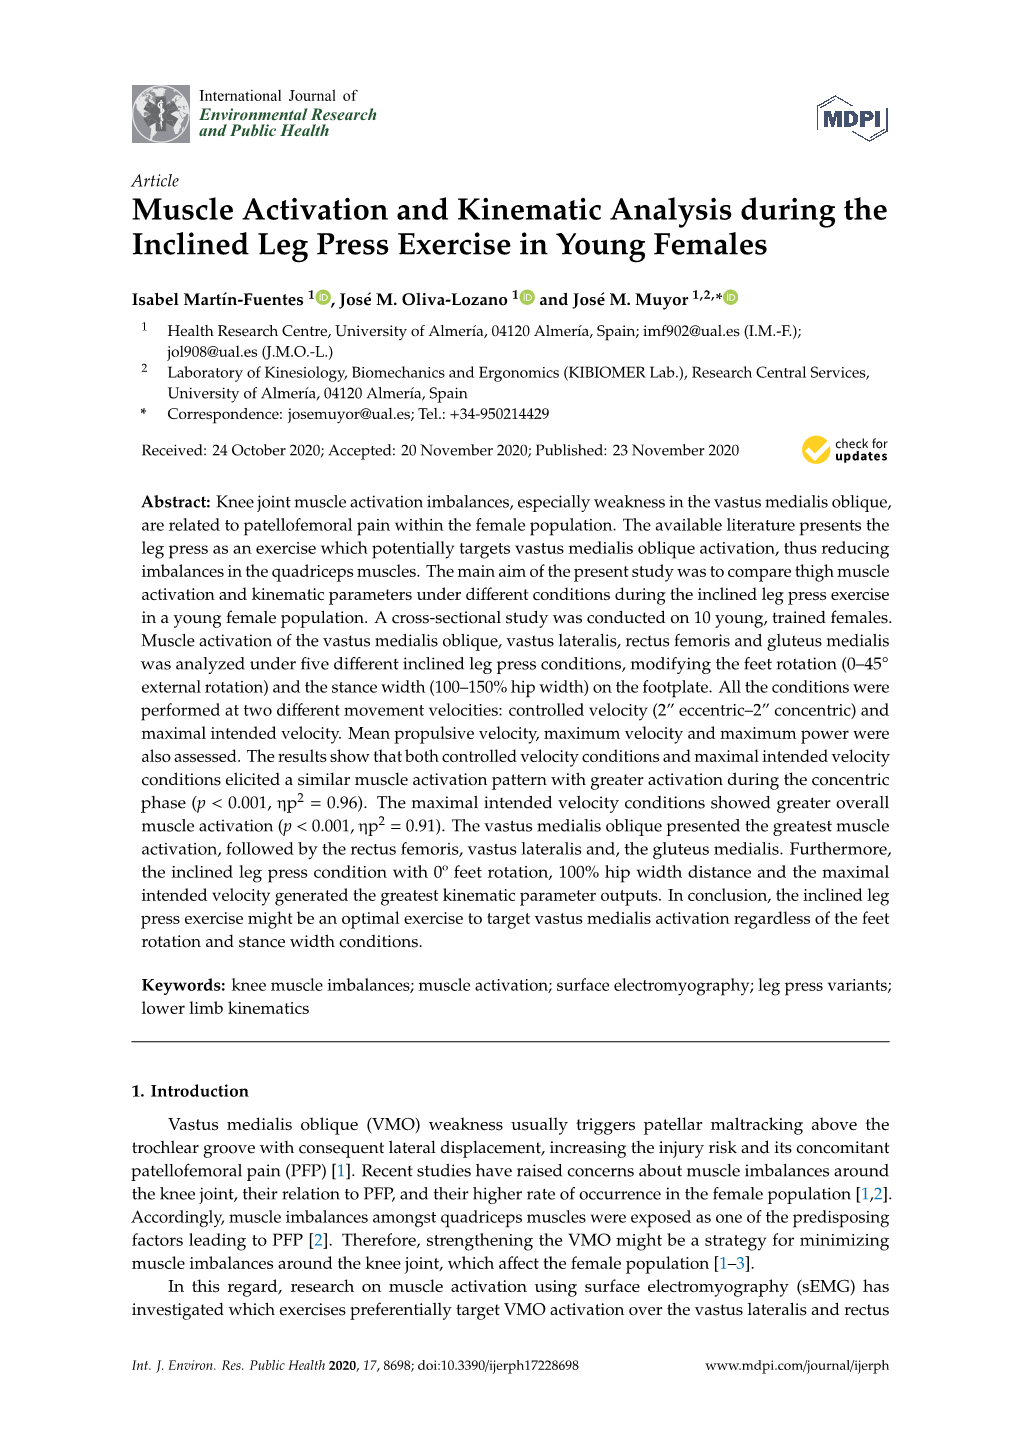 Muscle Activation and Kinematic Analysis During the Inclined Leg Press Exercise in Young Females